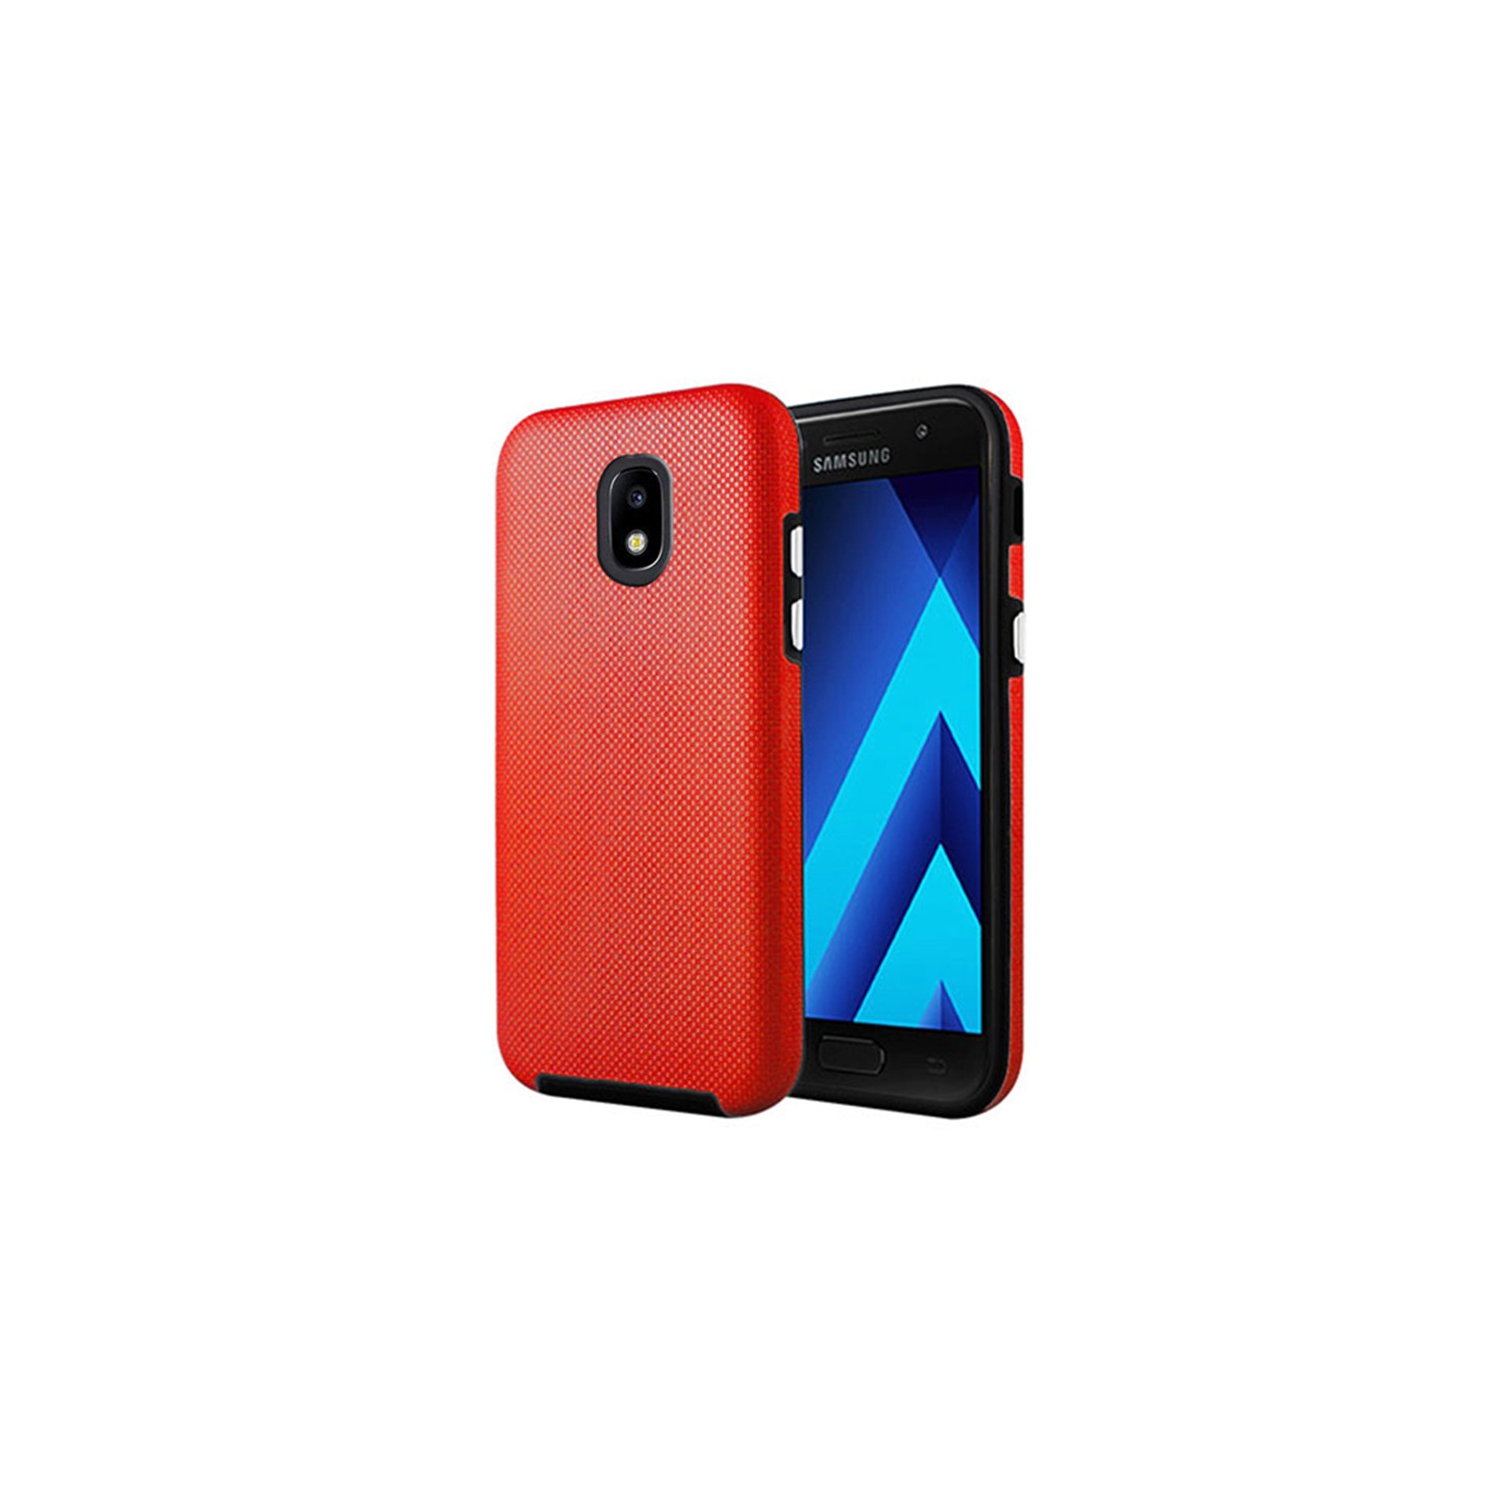 【CSmart】 Slim Fitted Hybrid Hard PC Shell Shockproof Scratch Resistant Case Cover for Samsung Galaxy J3 2018, Red